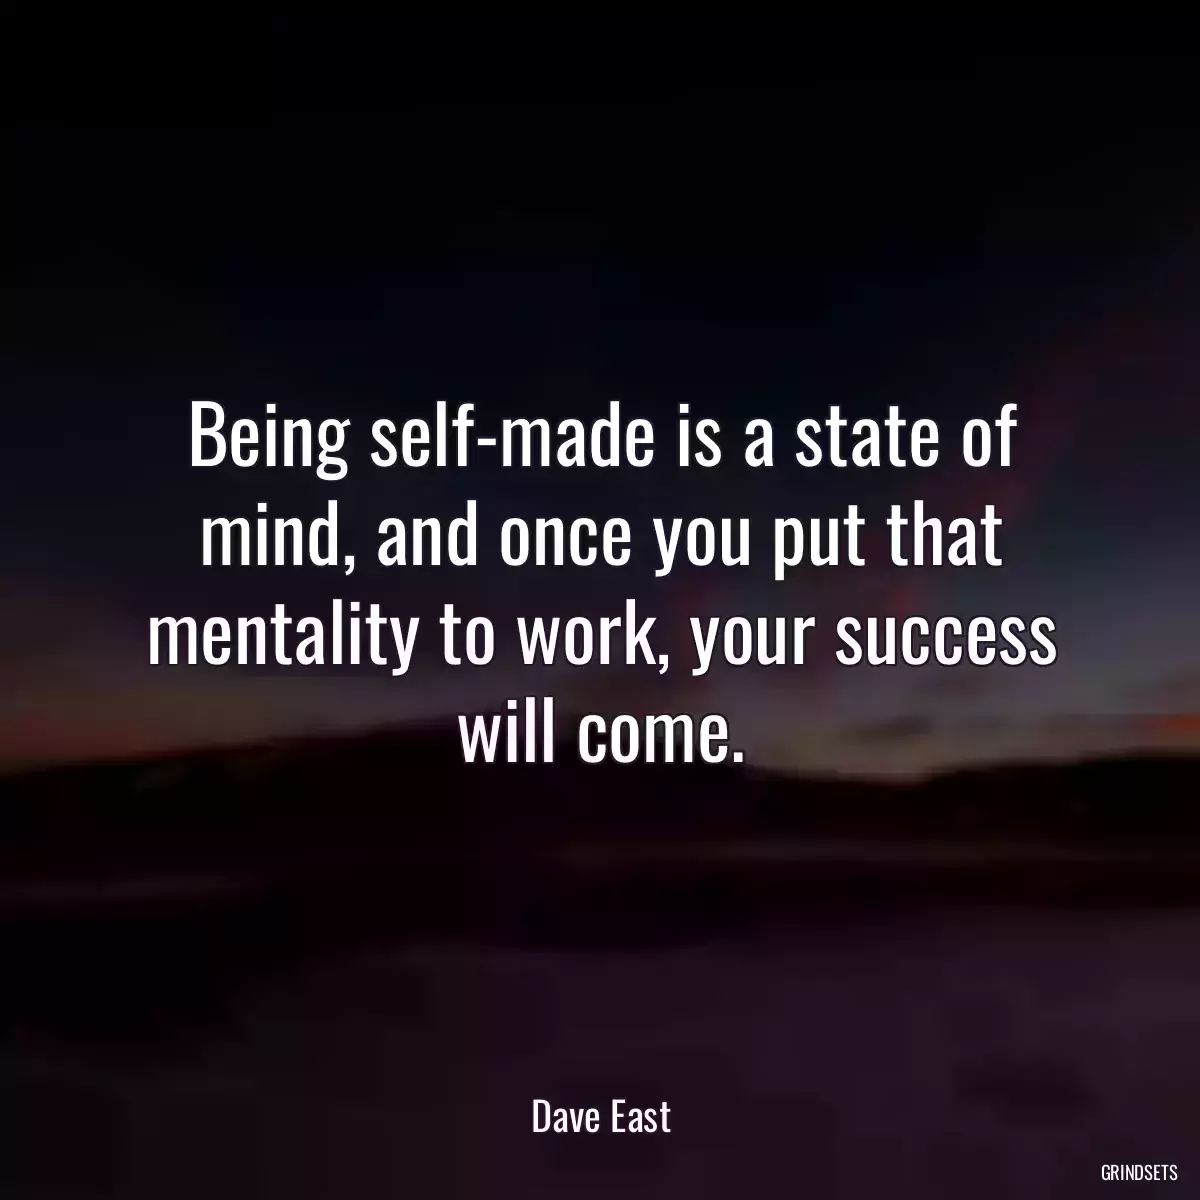 Being self-made is a state of mind, and once you put that mentality to work, your success will come.